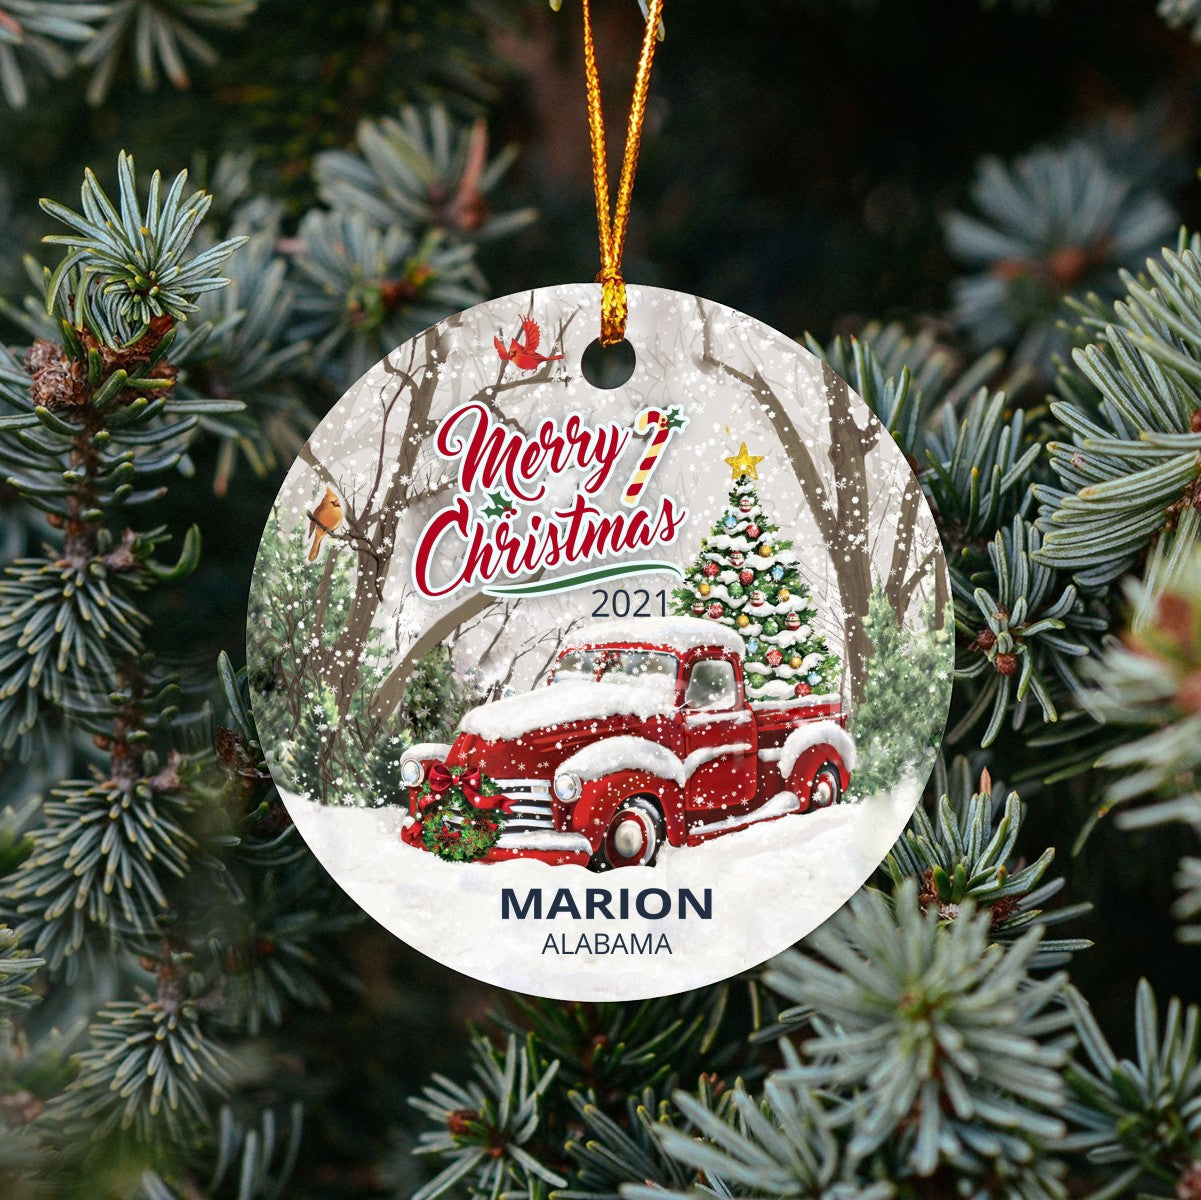 Christmas Tree Ornaments Marion - Ornament Customize With Name City And State Marion Alabama AL - Red Truck Xmas Ornaments 3'' Plastic Gift For Family, Friend And Housewarming